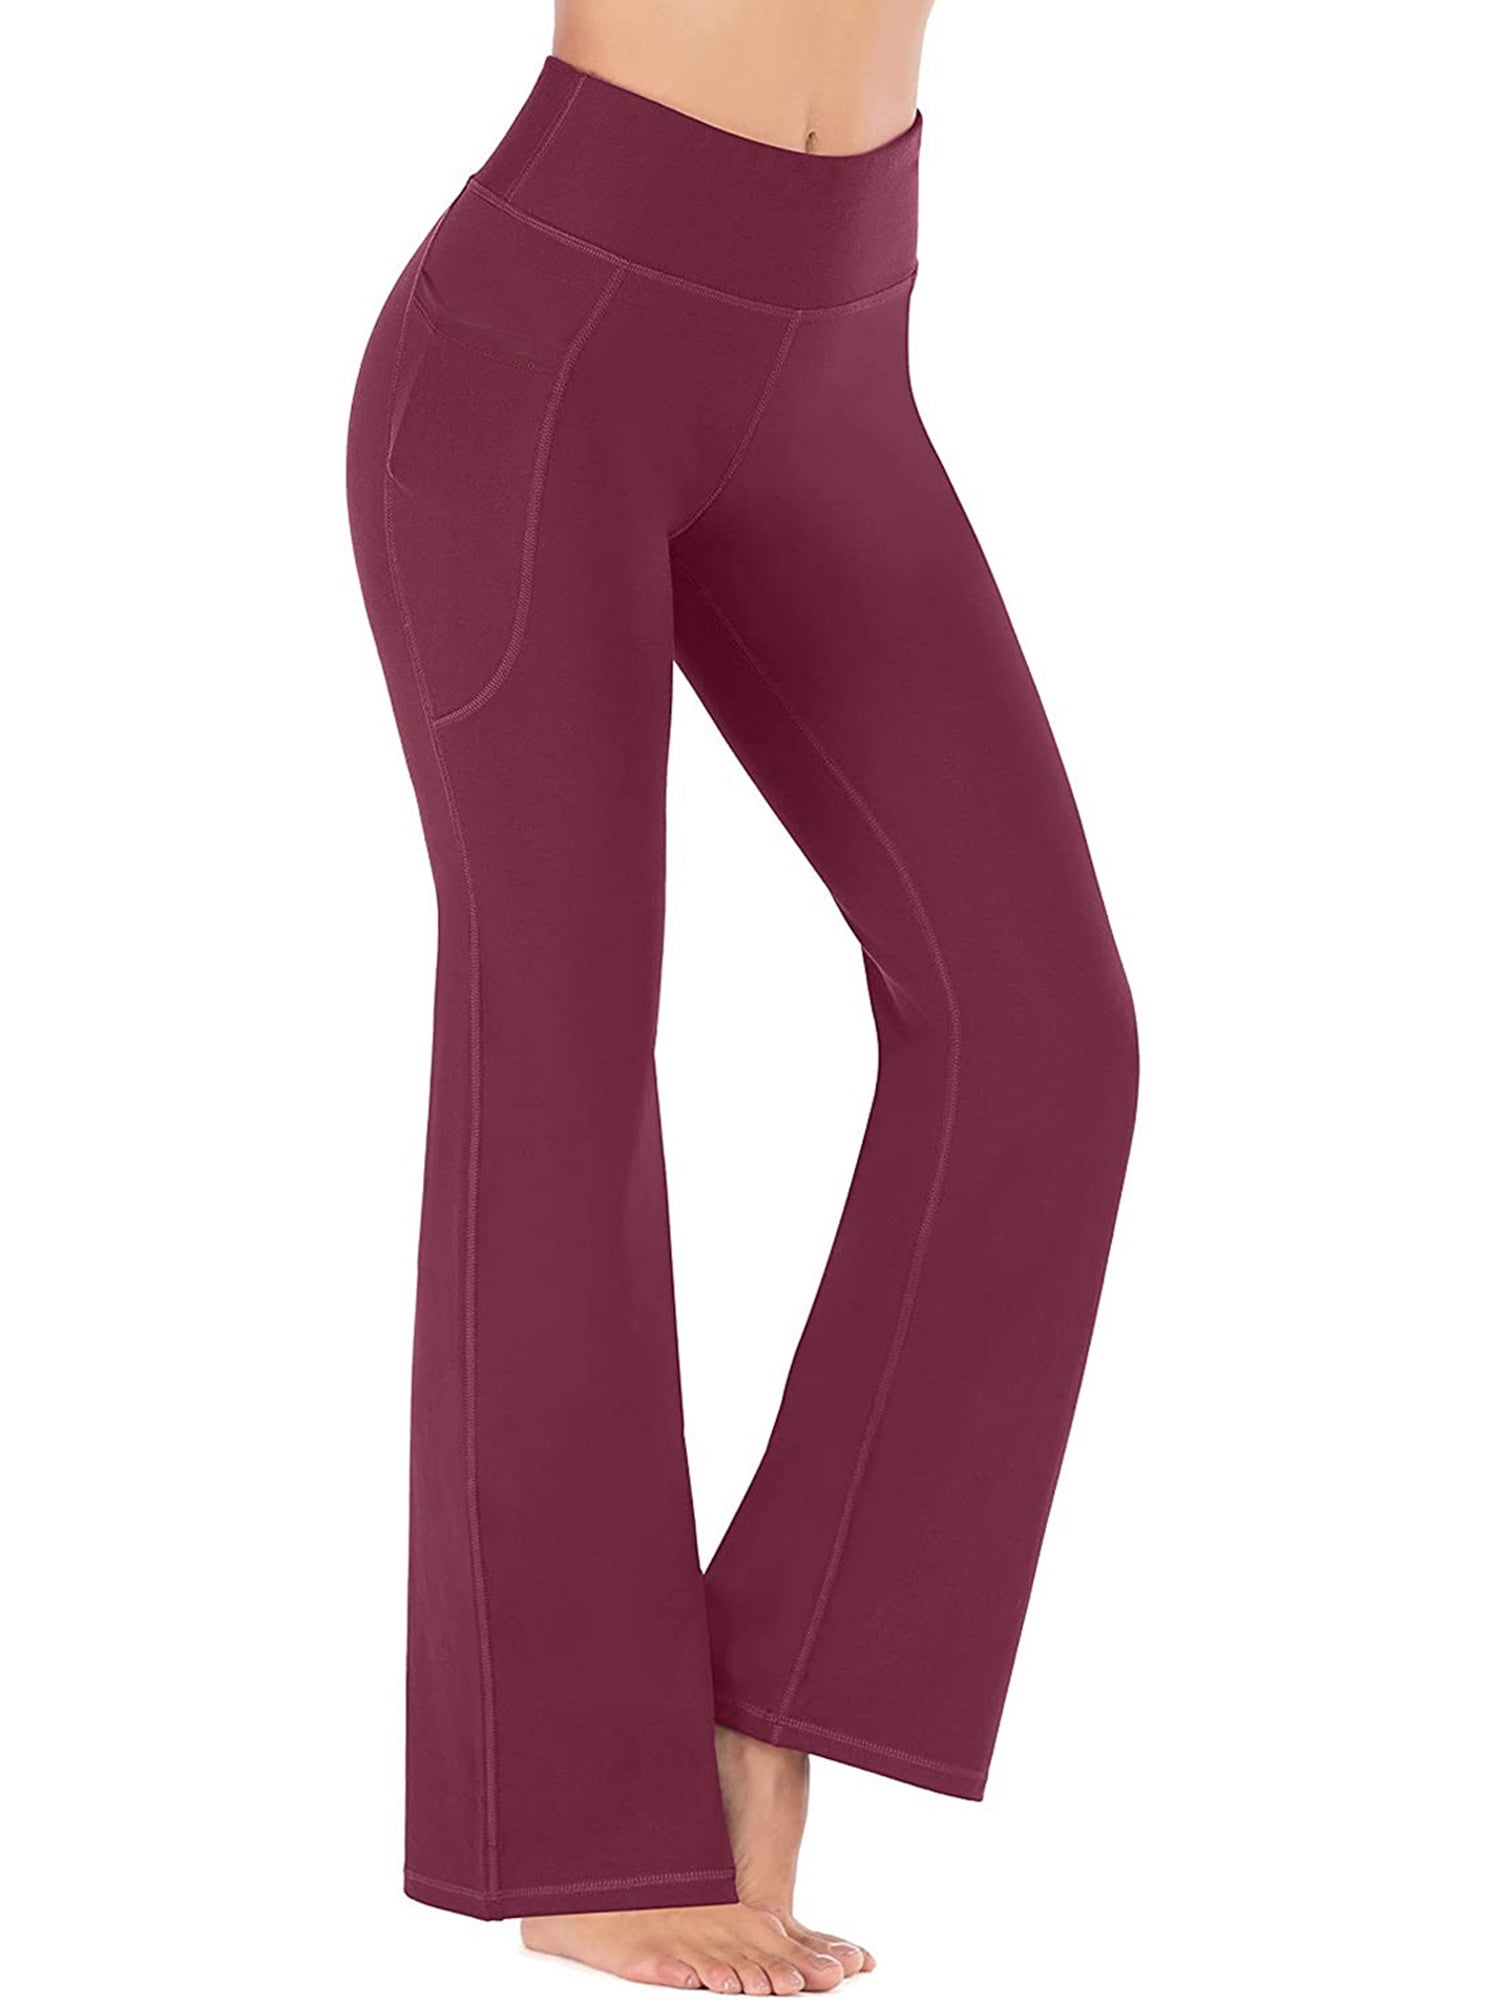 Details about   Womens High Waisted Yoga Sports Pants Fitness Bottom Leggings Trousers Joggings 